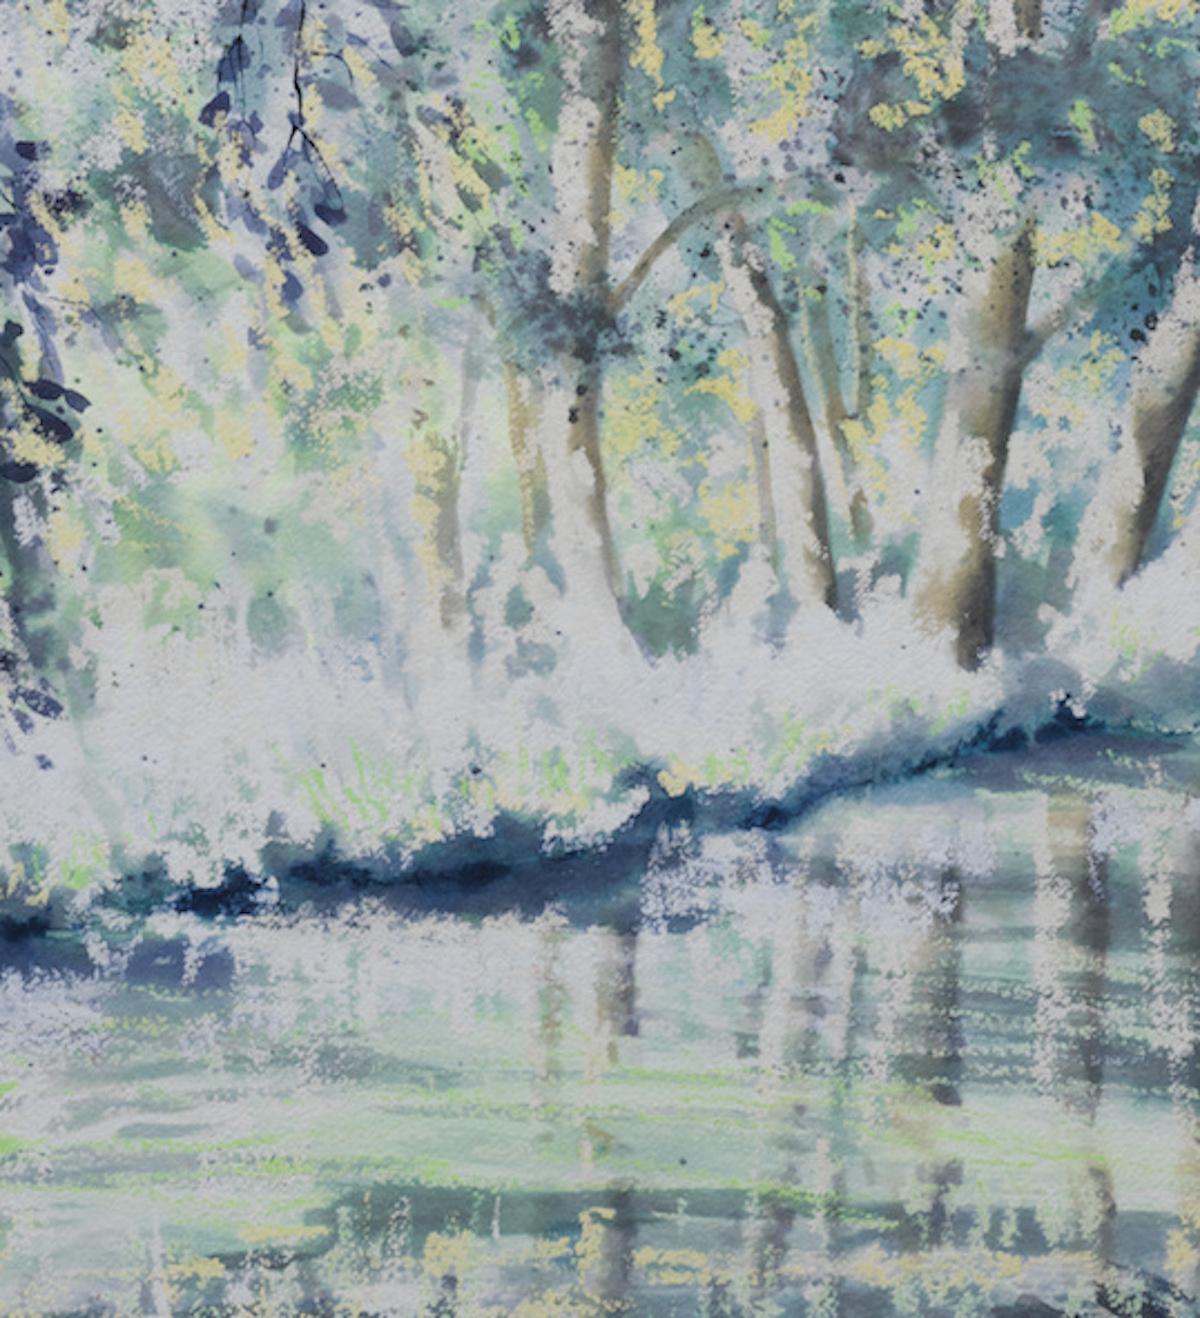 River Test Mixed Media Painting by Nicola Wiehahn, 2020 For Sale 4